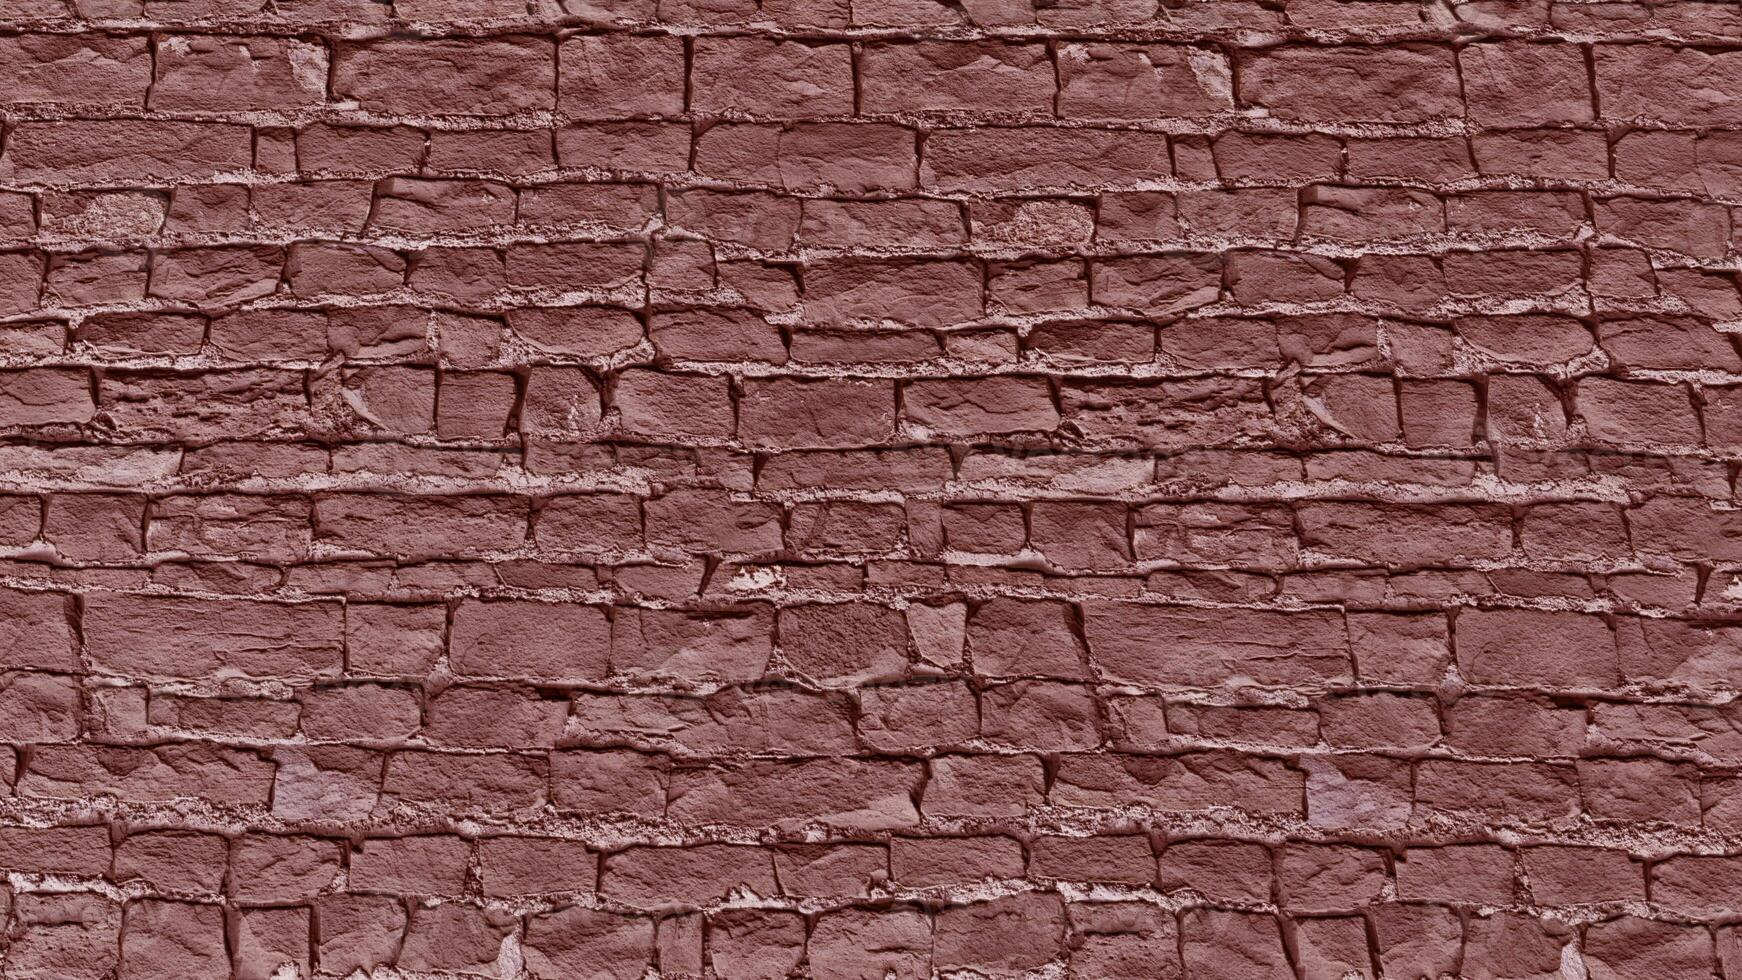 Brick pattern red for background or cover photo